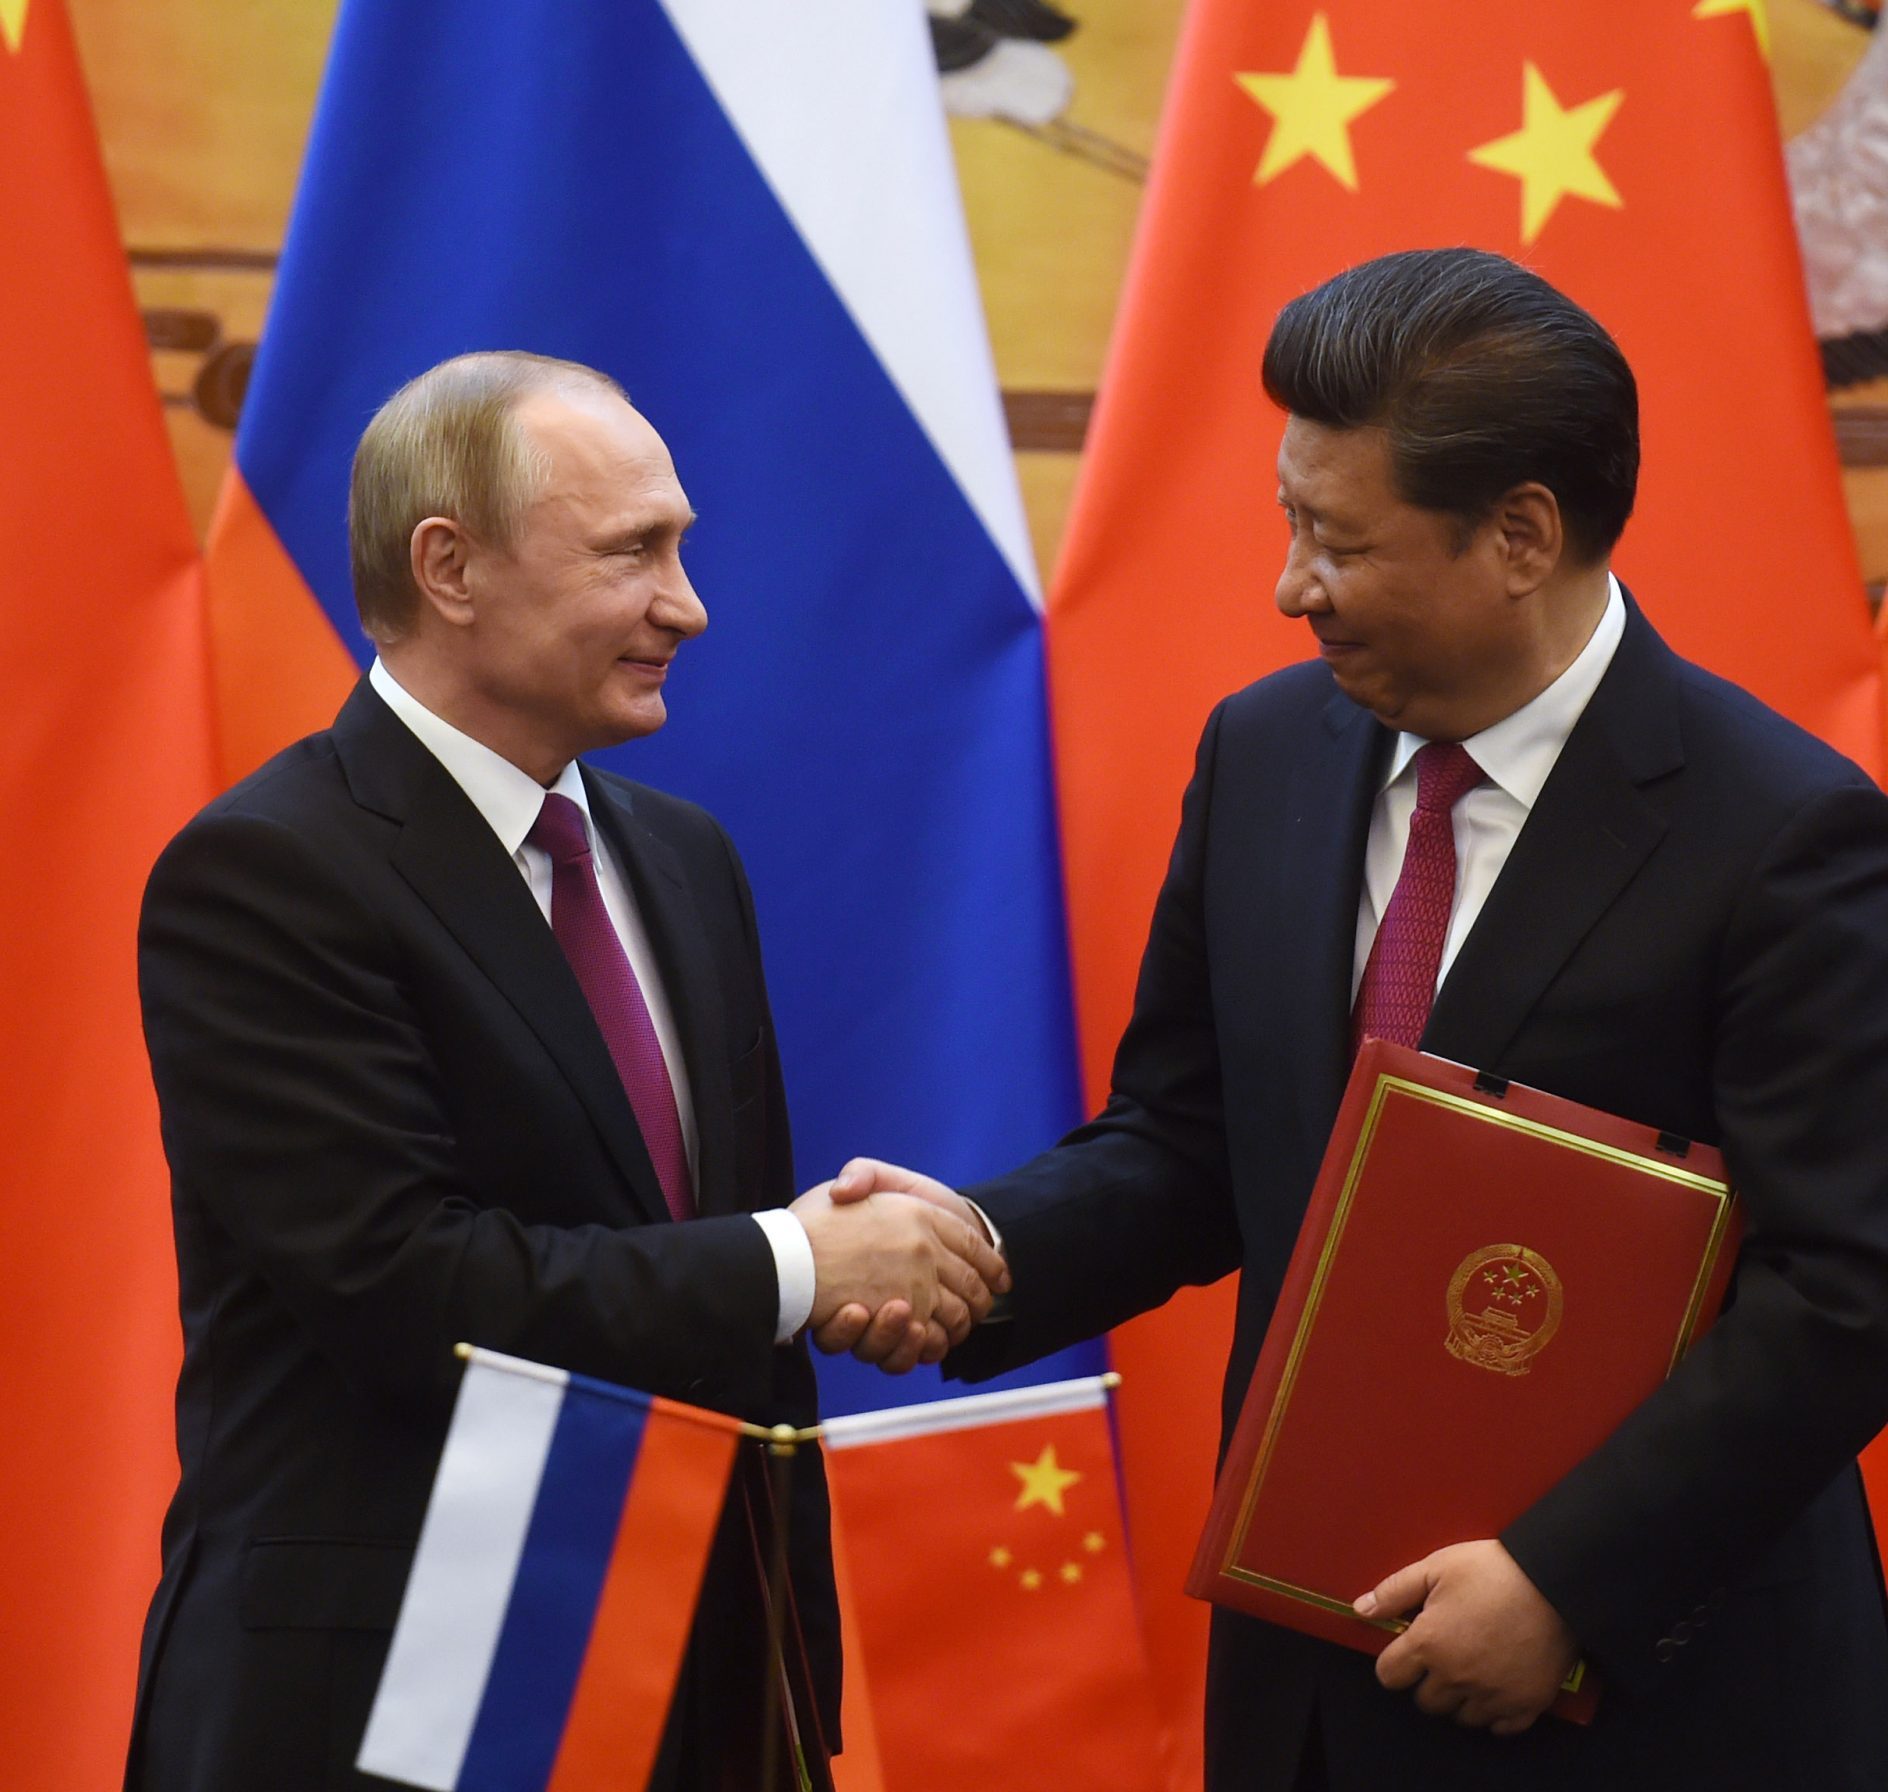 China Extends Congratulations to Putin on Election Victory